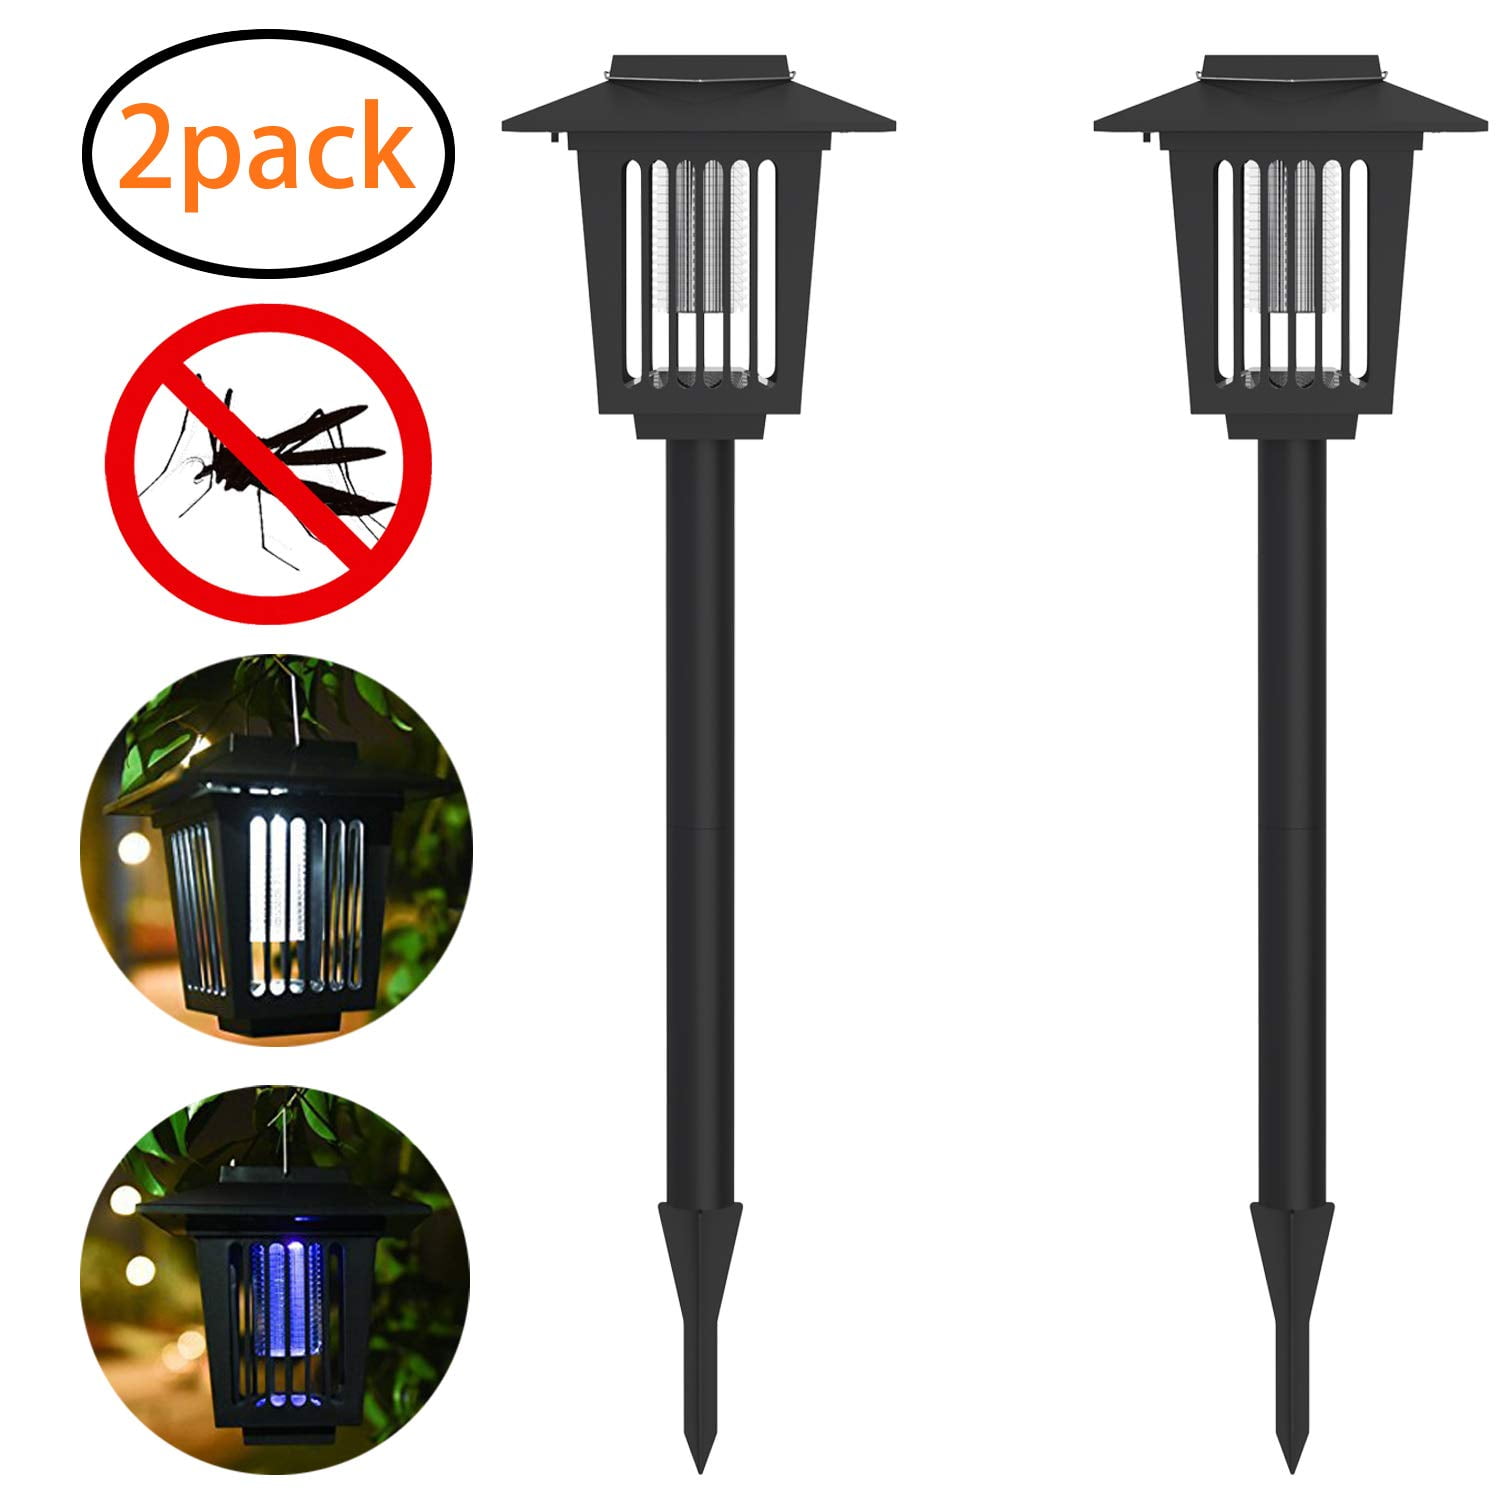 1 pcs Solar Mosquito Killer LED Light Pest Bug Zapper Insect Mosquito Killer Lamp Suit for Indoor Outdoor Home Garden Porch Patio Backyard 